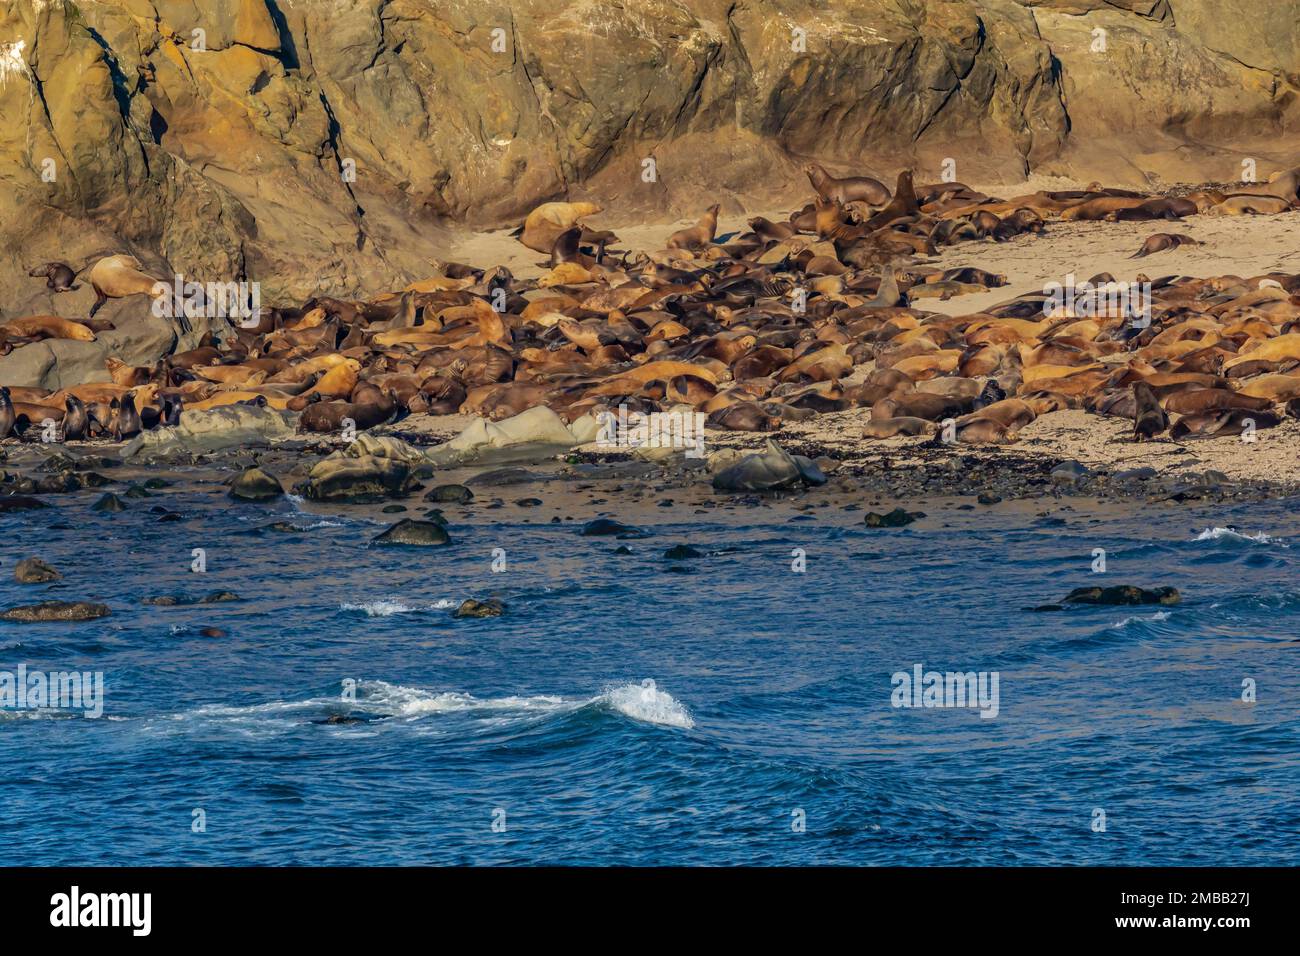 Haulout of California and Steller Sea Lions, and Northern Elephant Seals, Shell Island area of Cape Arago State Park on the Oregon Coast, USA Stock Photo